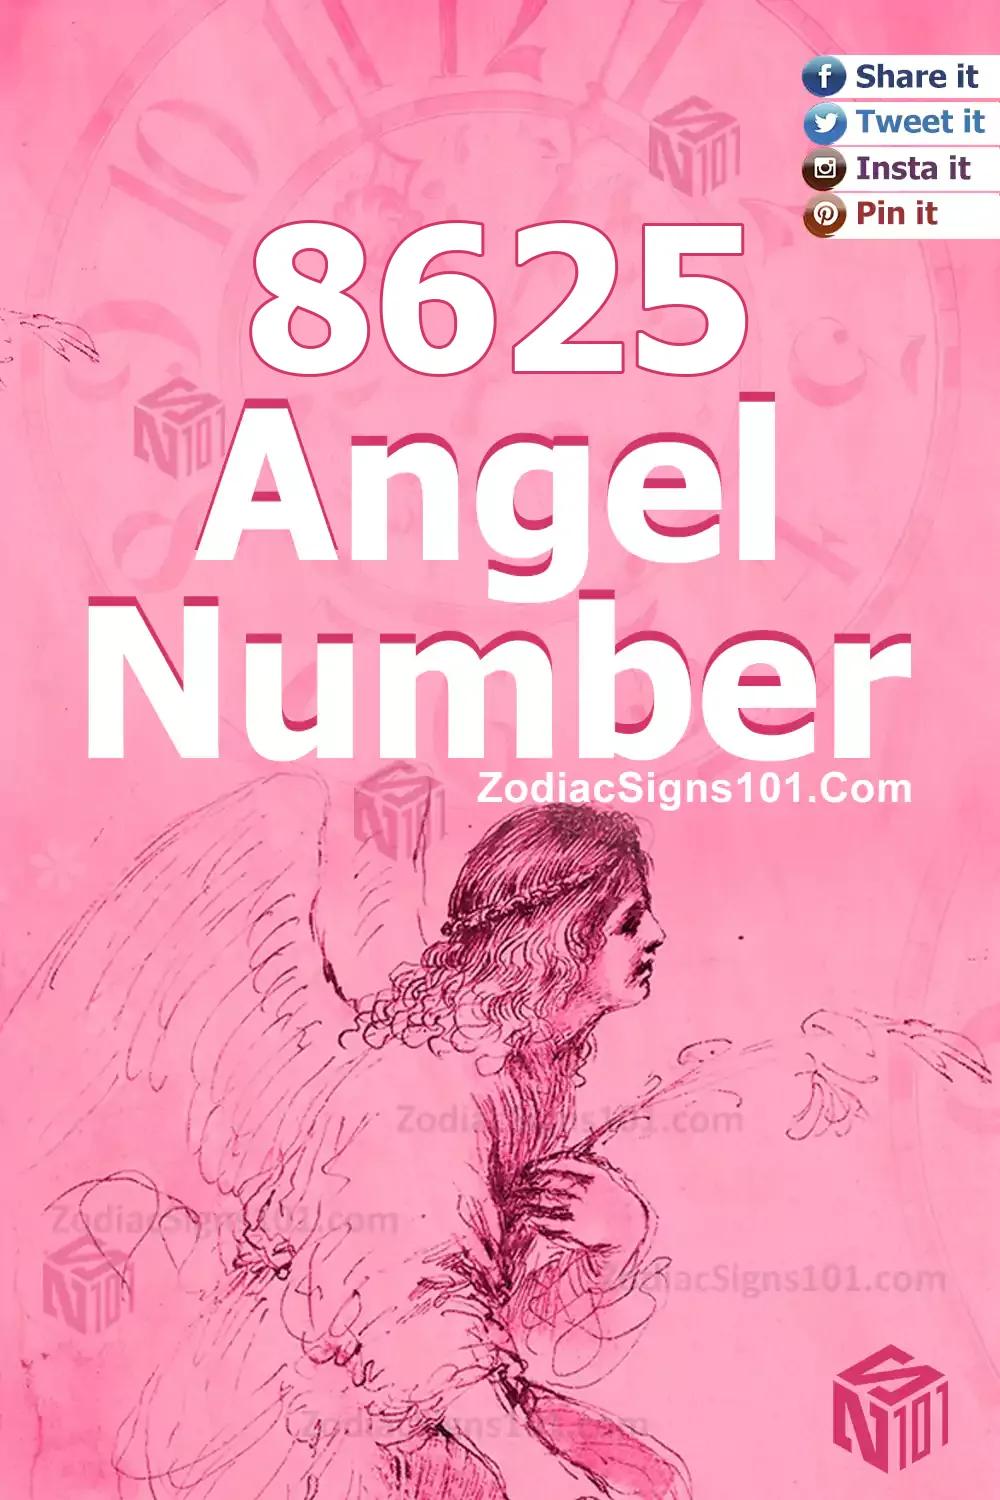 8625 Angel Number Meaning